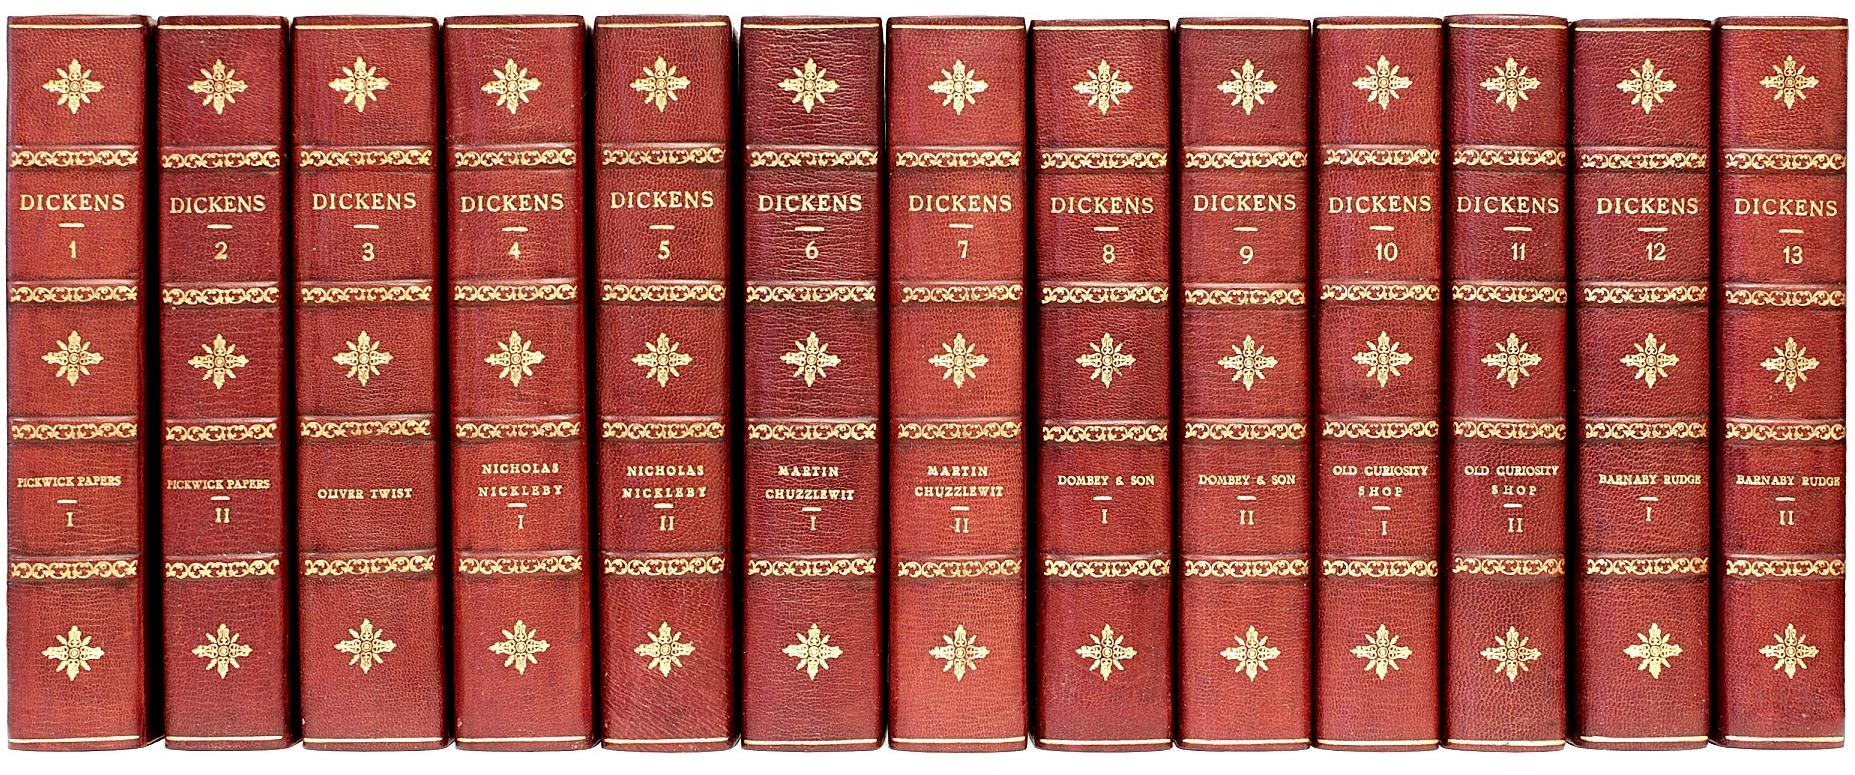 Late 19th Century The Complete Works & Life of Charles Dickens, '38 Vols, 1898' Gadshill Edition